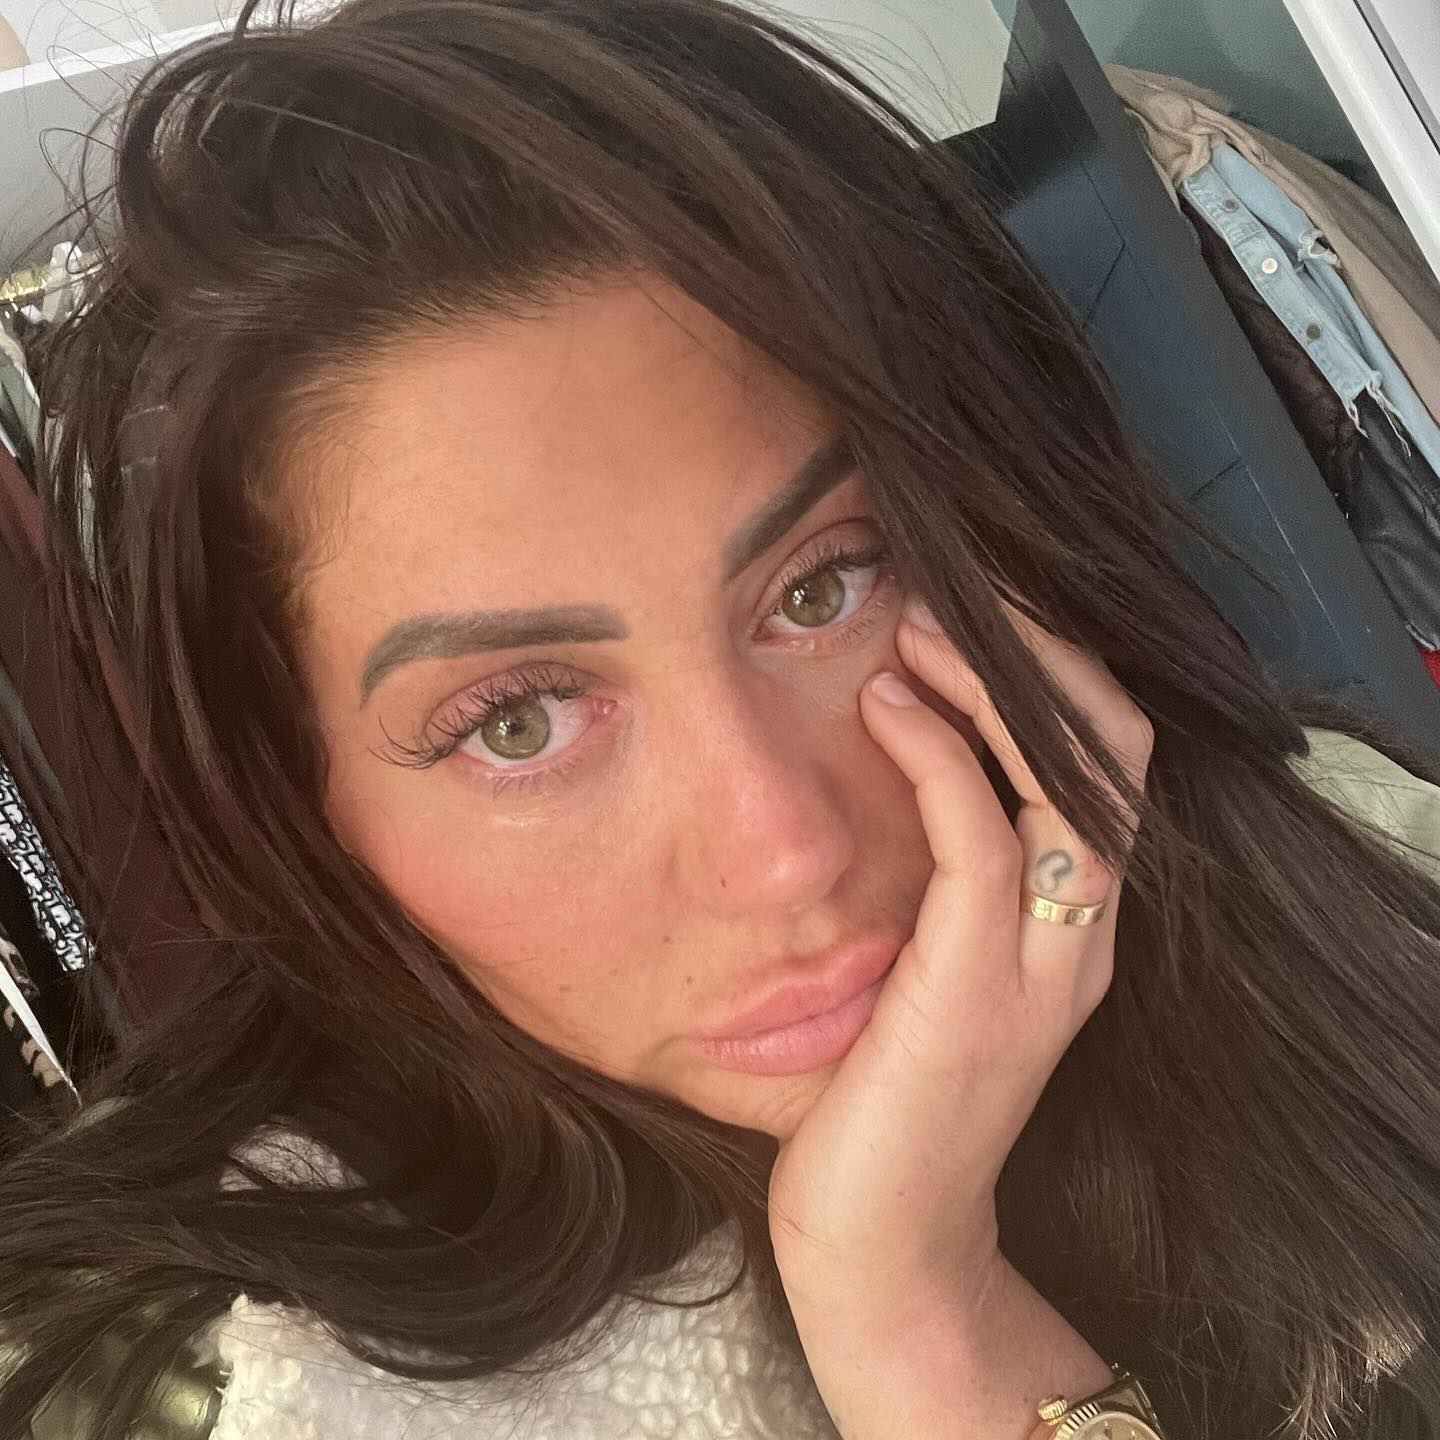 Chloe Ferry was flooded with messages of support as she opened up on her health anxiety